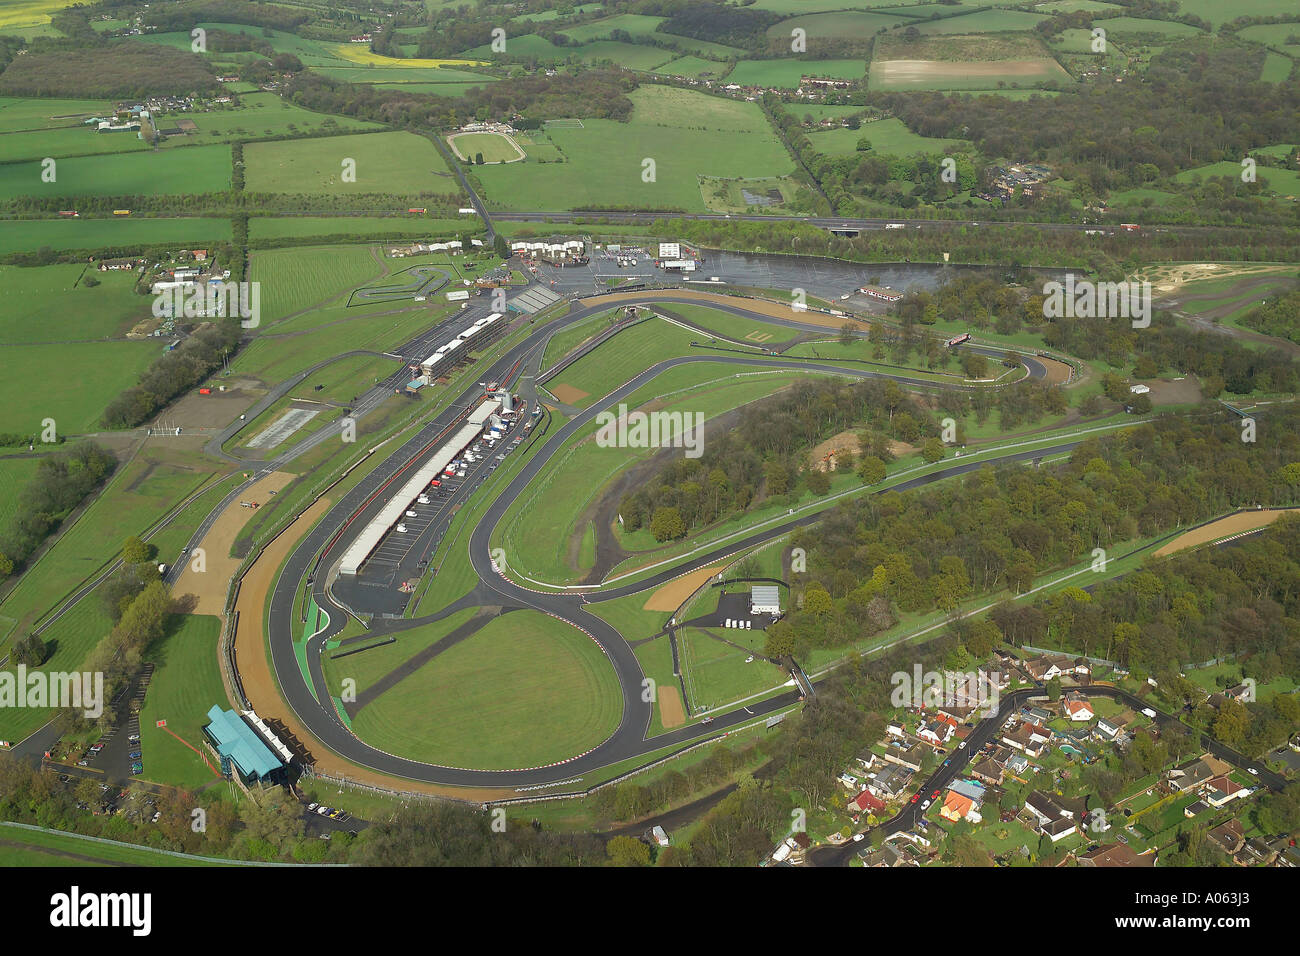 Aerial view of Brands Hatch Motor Racing Circuit in Kent, once home of the Formula 1 British Grand Prix Stock Photo